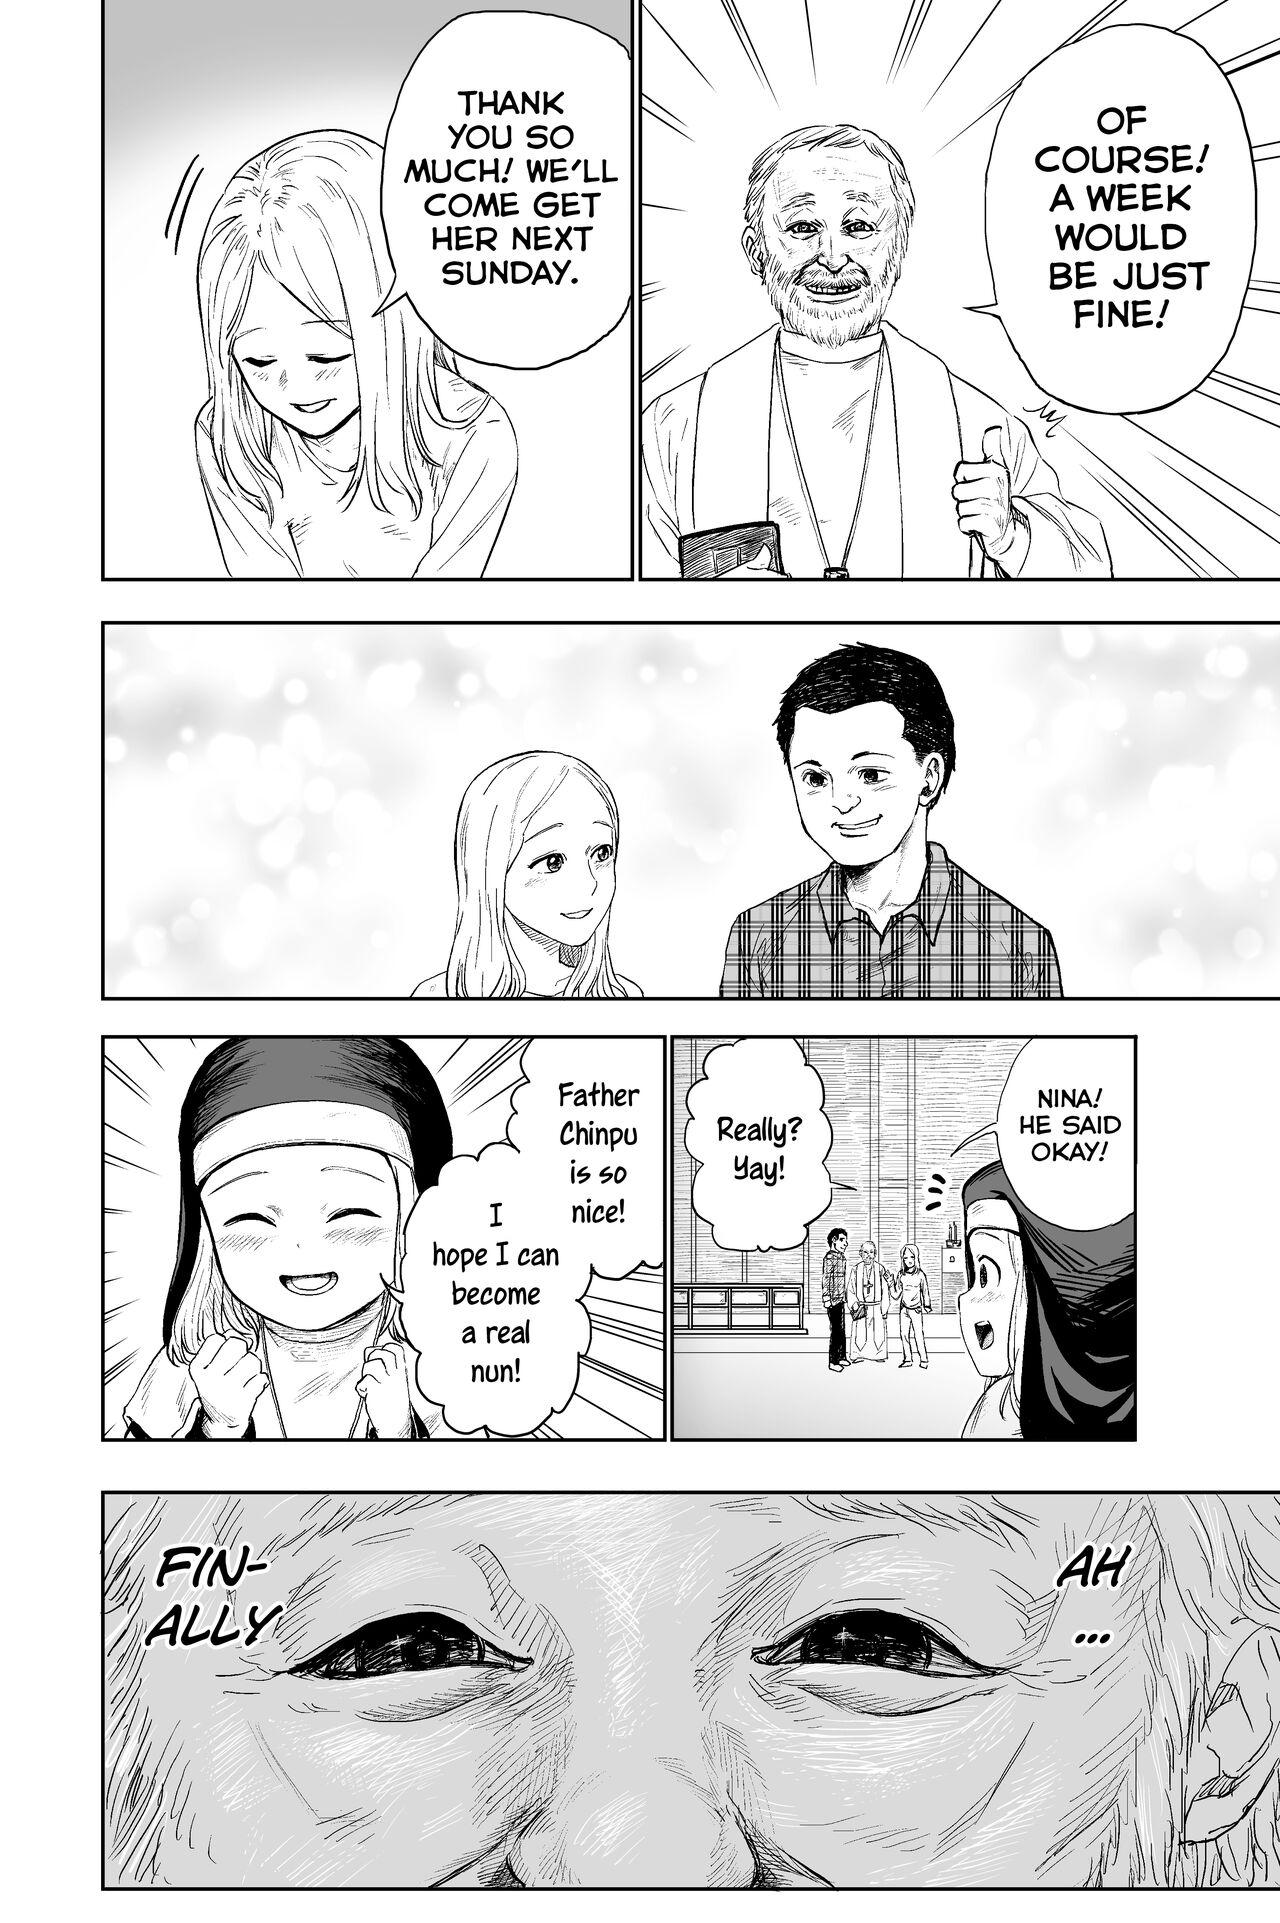 Stroking Loli Sister to Sex suru Isshuukan | A Week of Sex With a Loli Nun Reversecowgirl - Page 5